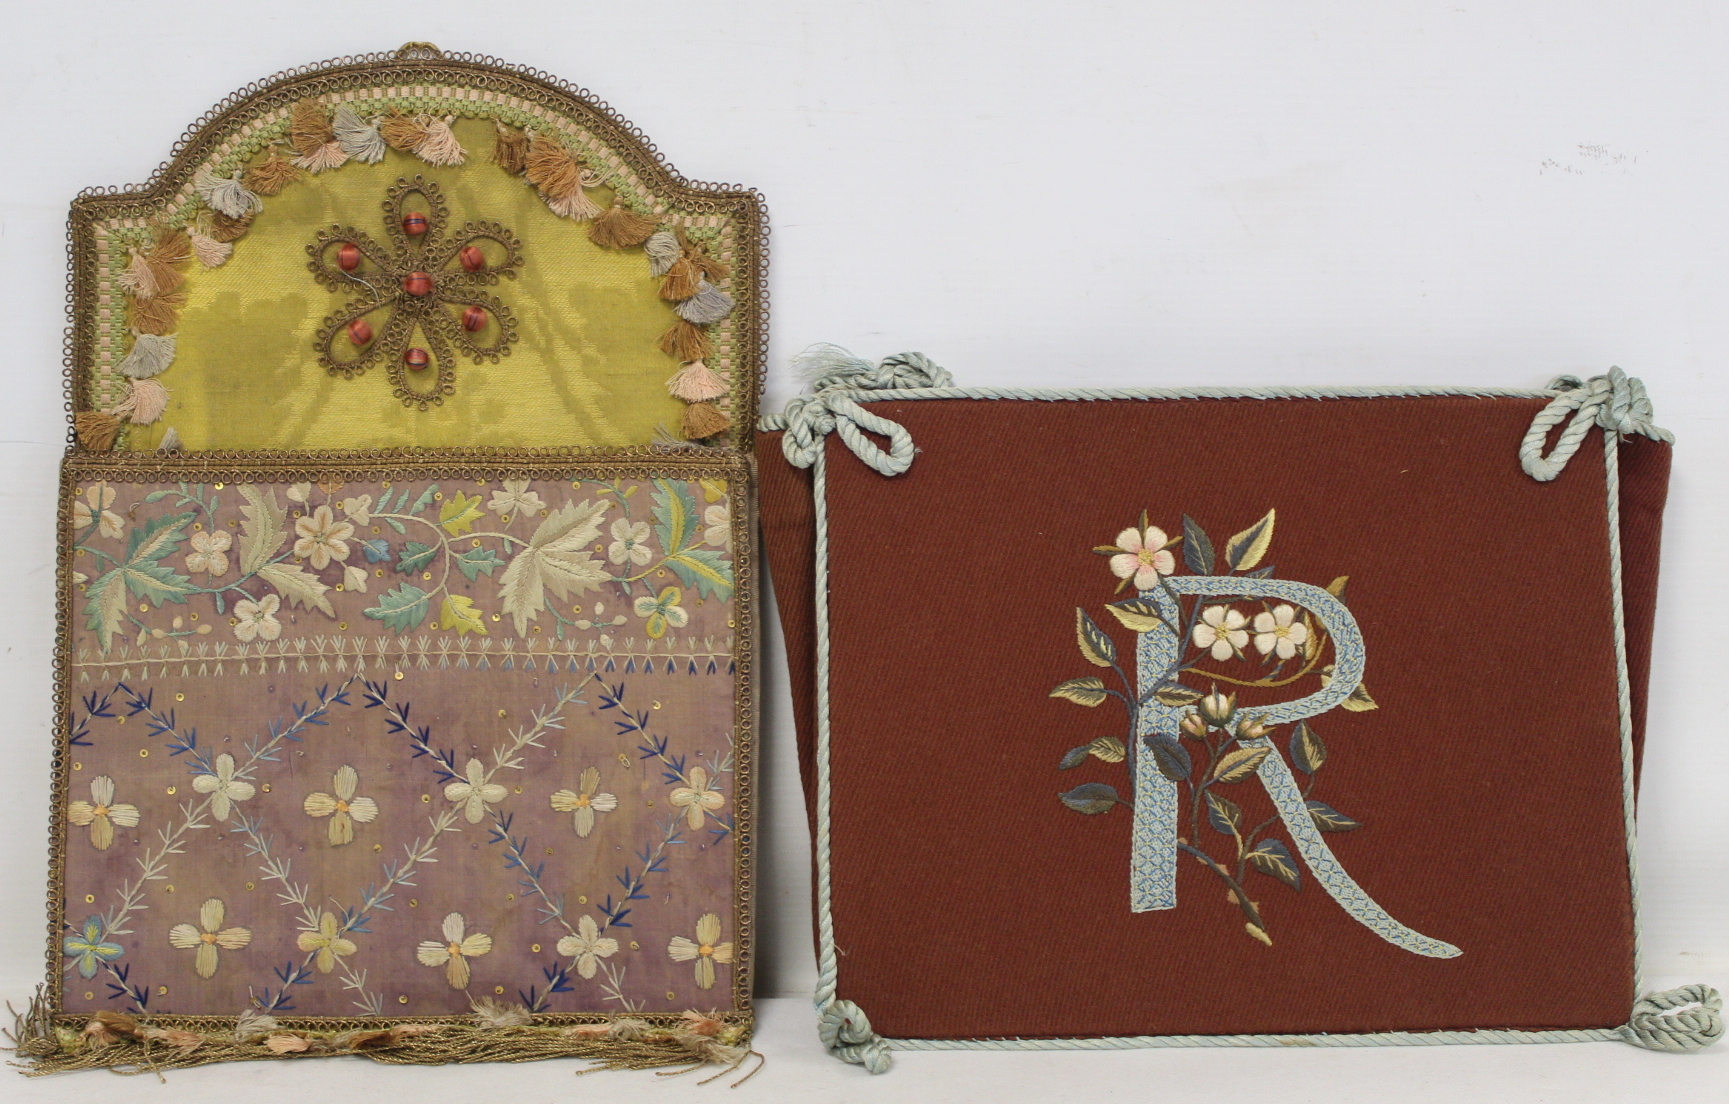 Georgian silk and damask wall pocket of rectangular form with arched top, floral and foliate